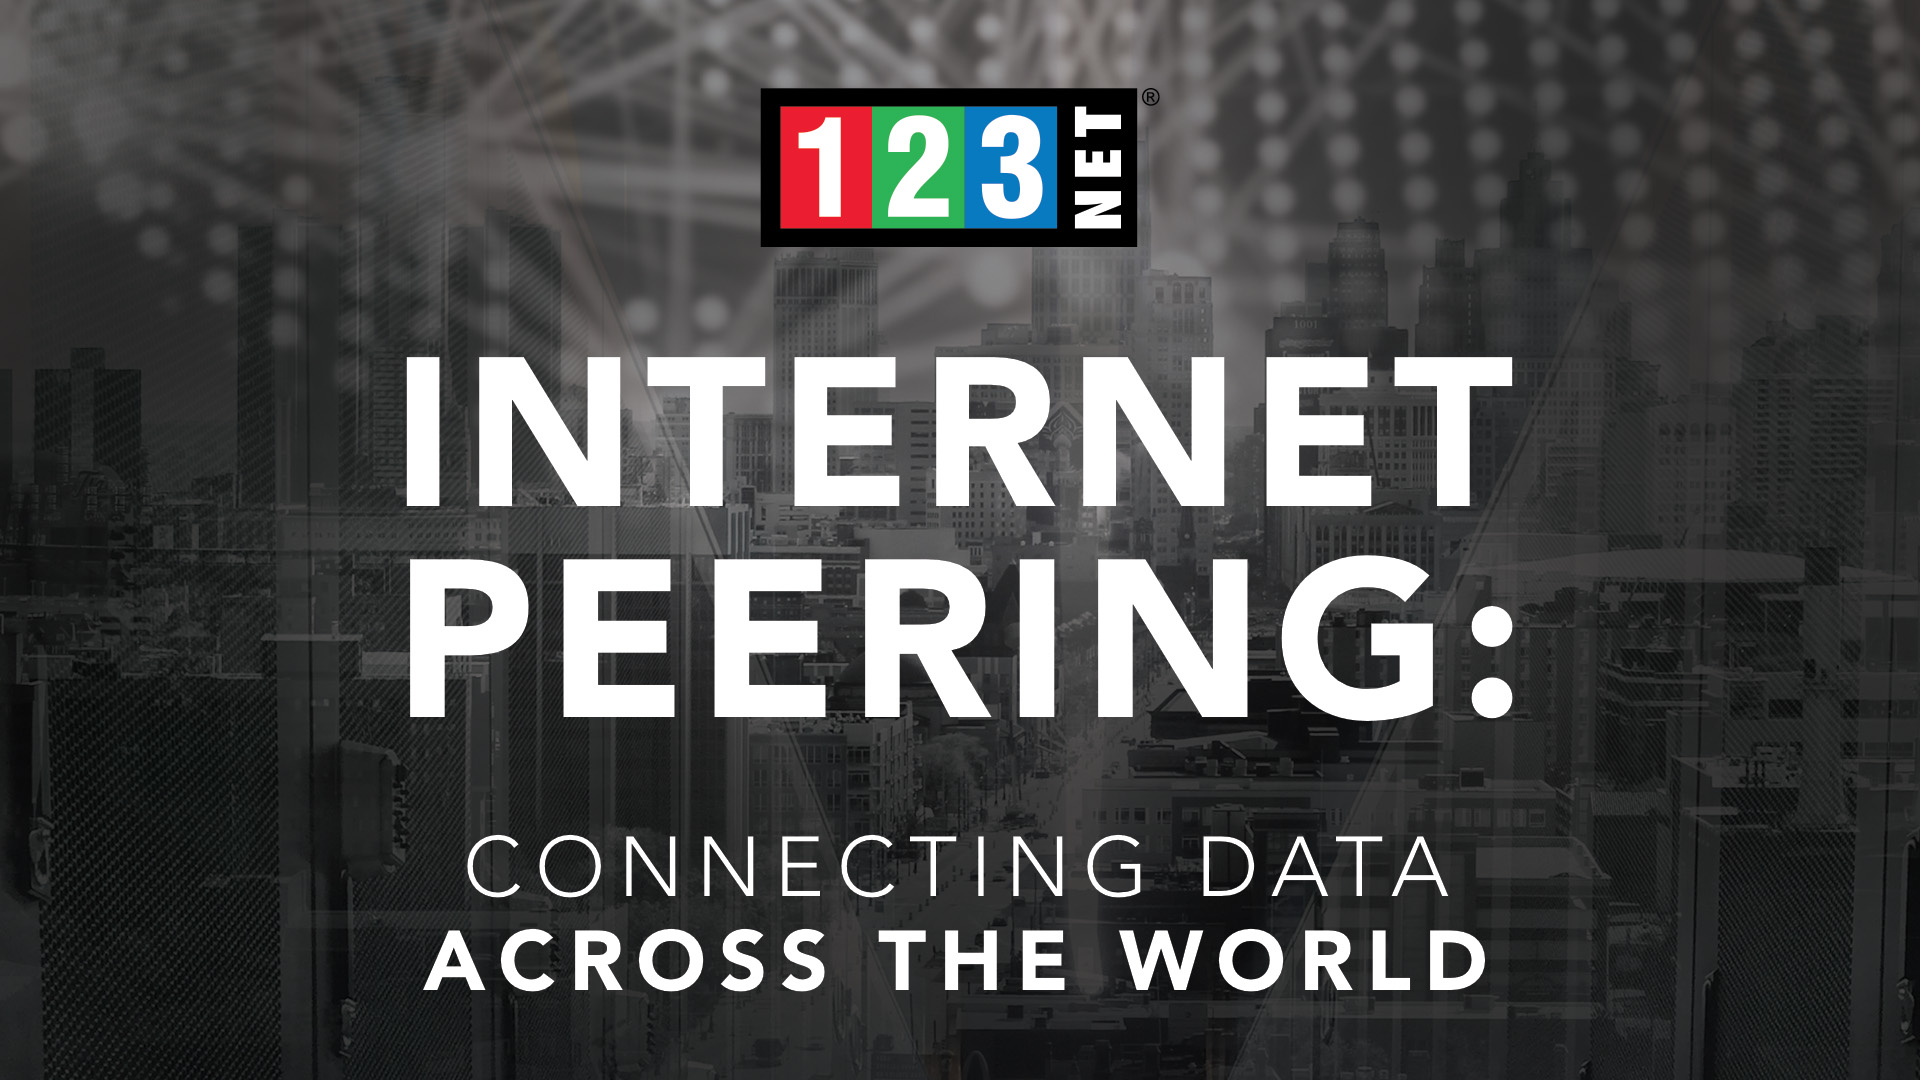 blog post explaining what internet peering is and the different types